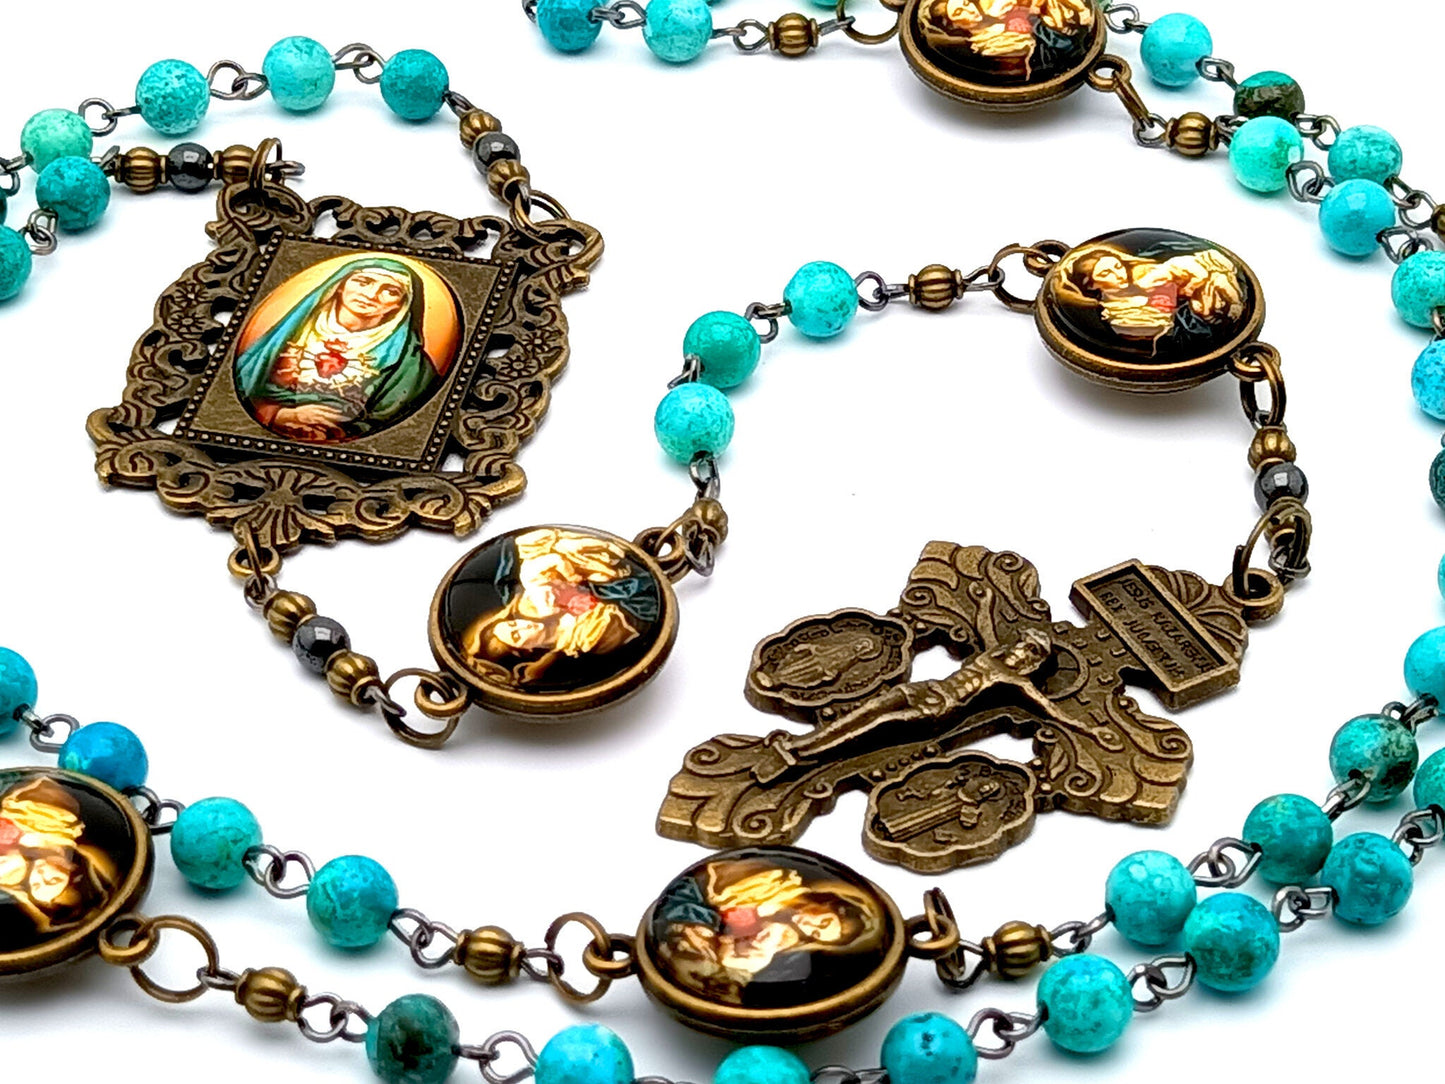 Our Lady of Sorrows unique rosary beads vintage style with turquoise gemstone beads and Our Lady of Divine Providence linking medals.